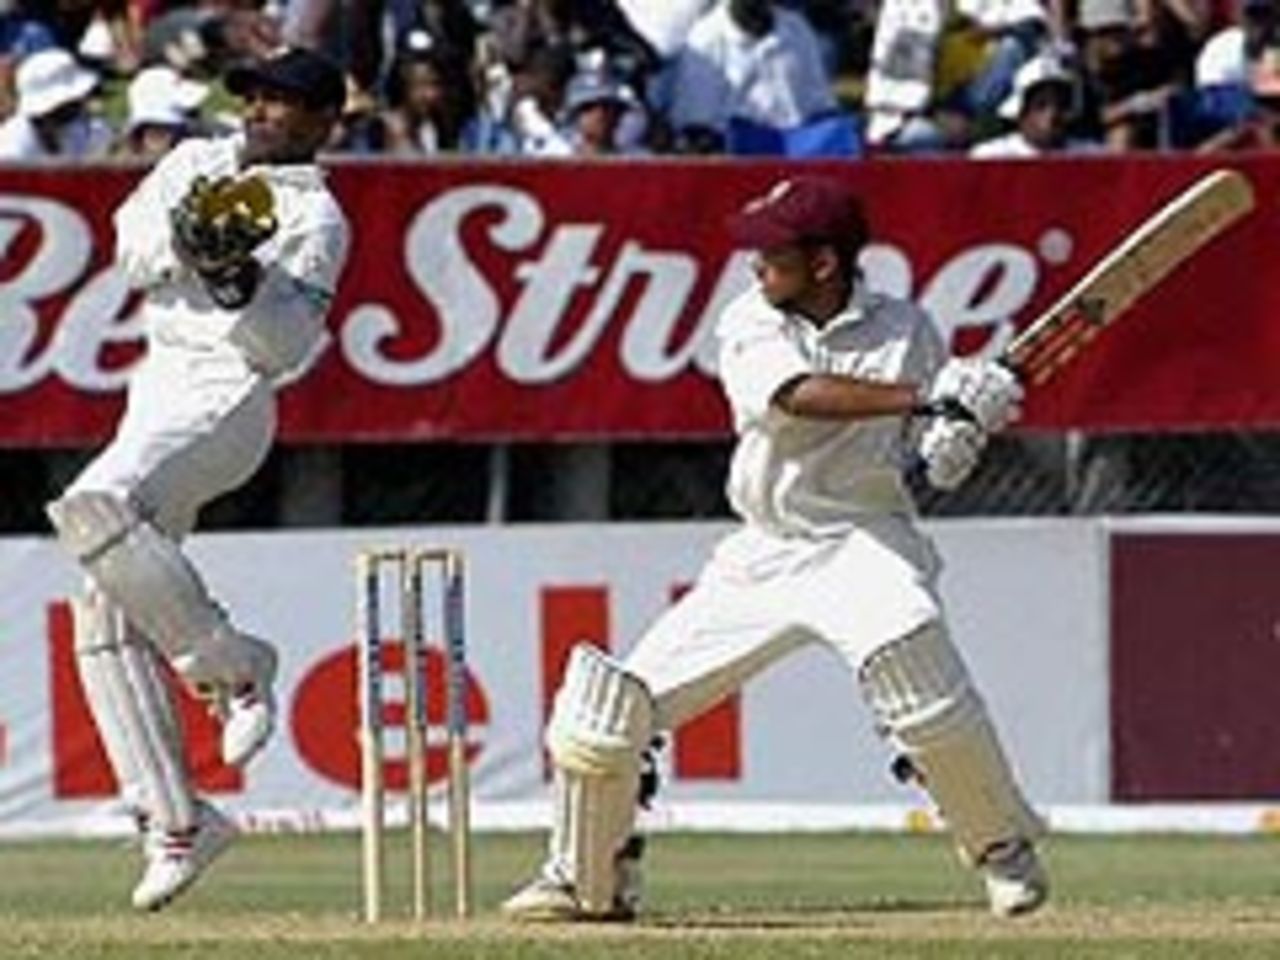 Ramnaresh Sarwan: added 161 for the third wicket with Brian Lara to seal a seven-wicket win